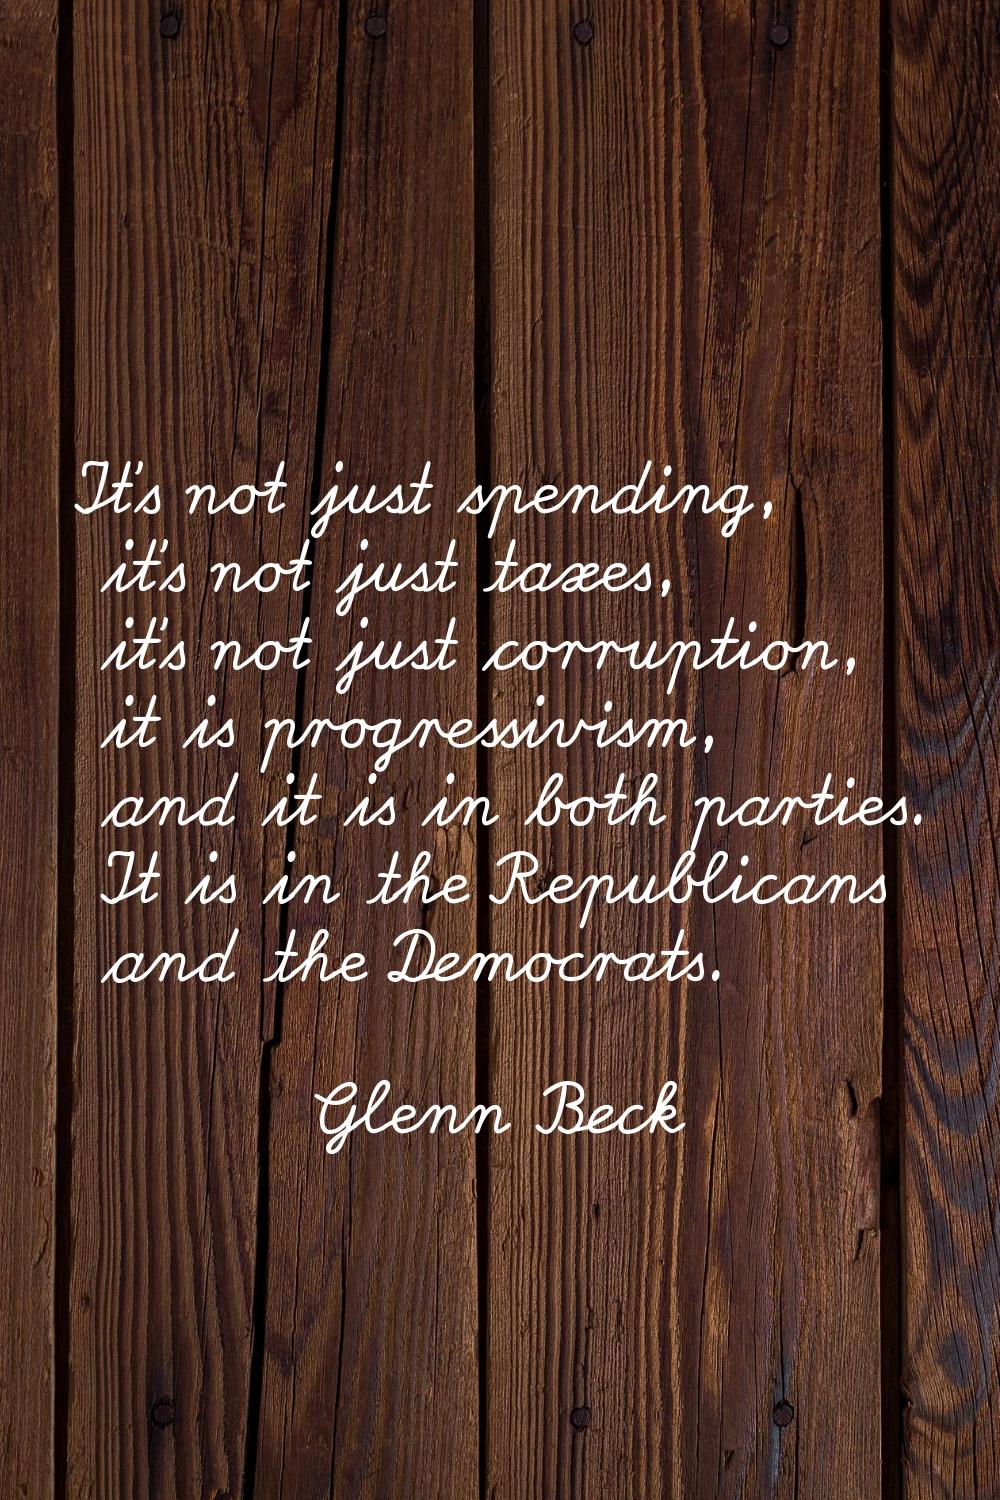 It's not just spending, it's not just taxes, it's not just corruption, it is progressivism, and it 